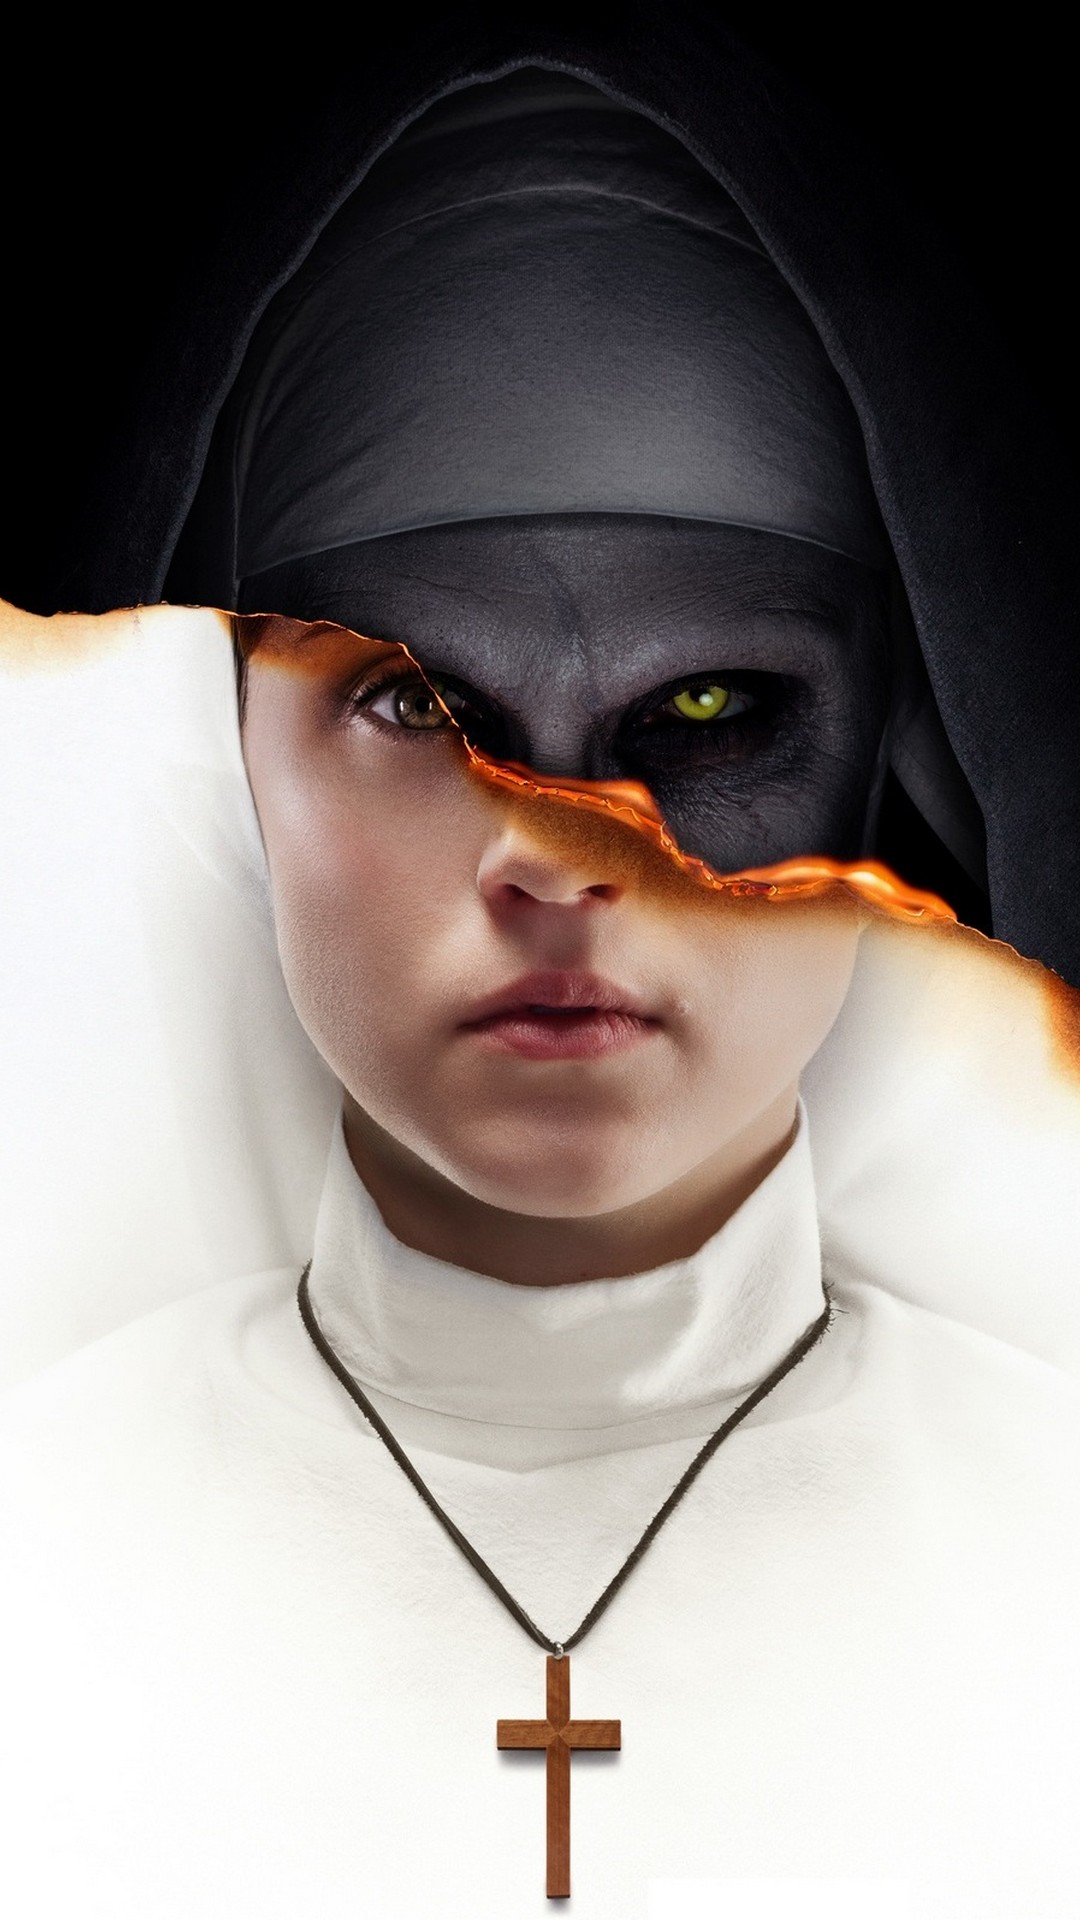 The Nun Wallpaper For Android with image resolution 1080x1920 pixel. You can make this wallpaper for your Android backgrounds, Tablet, Smartphones Screensavers and Mobile Phone Lock Screen